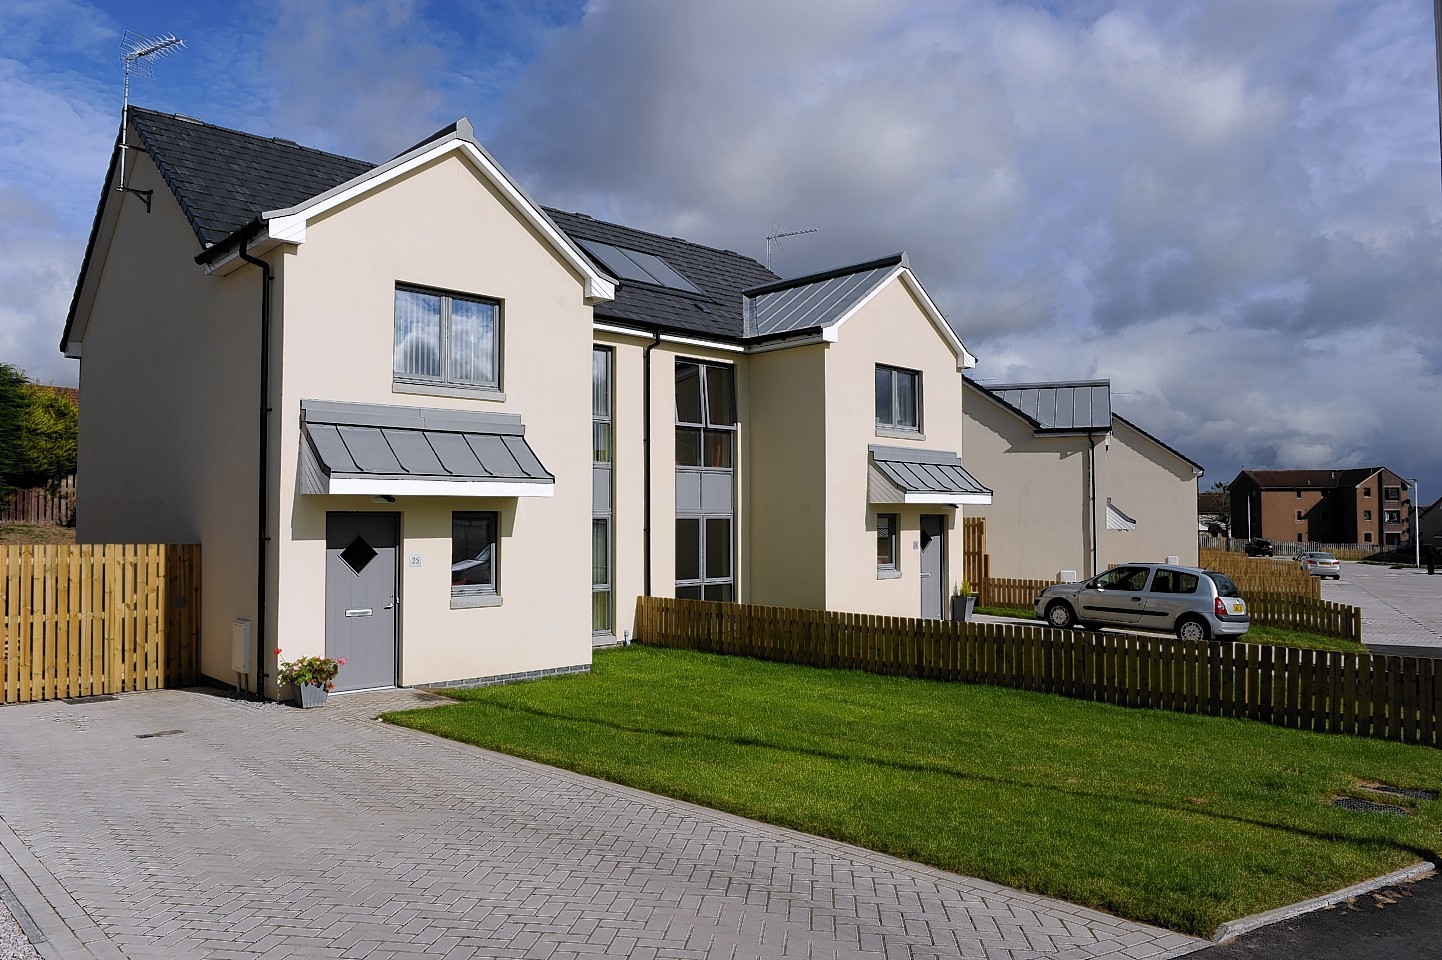 Council homes on Stonefield Place, Inverurie